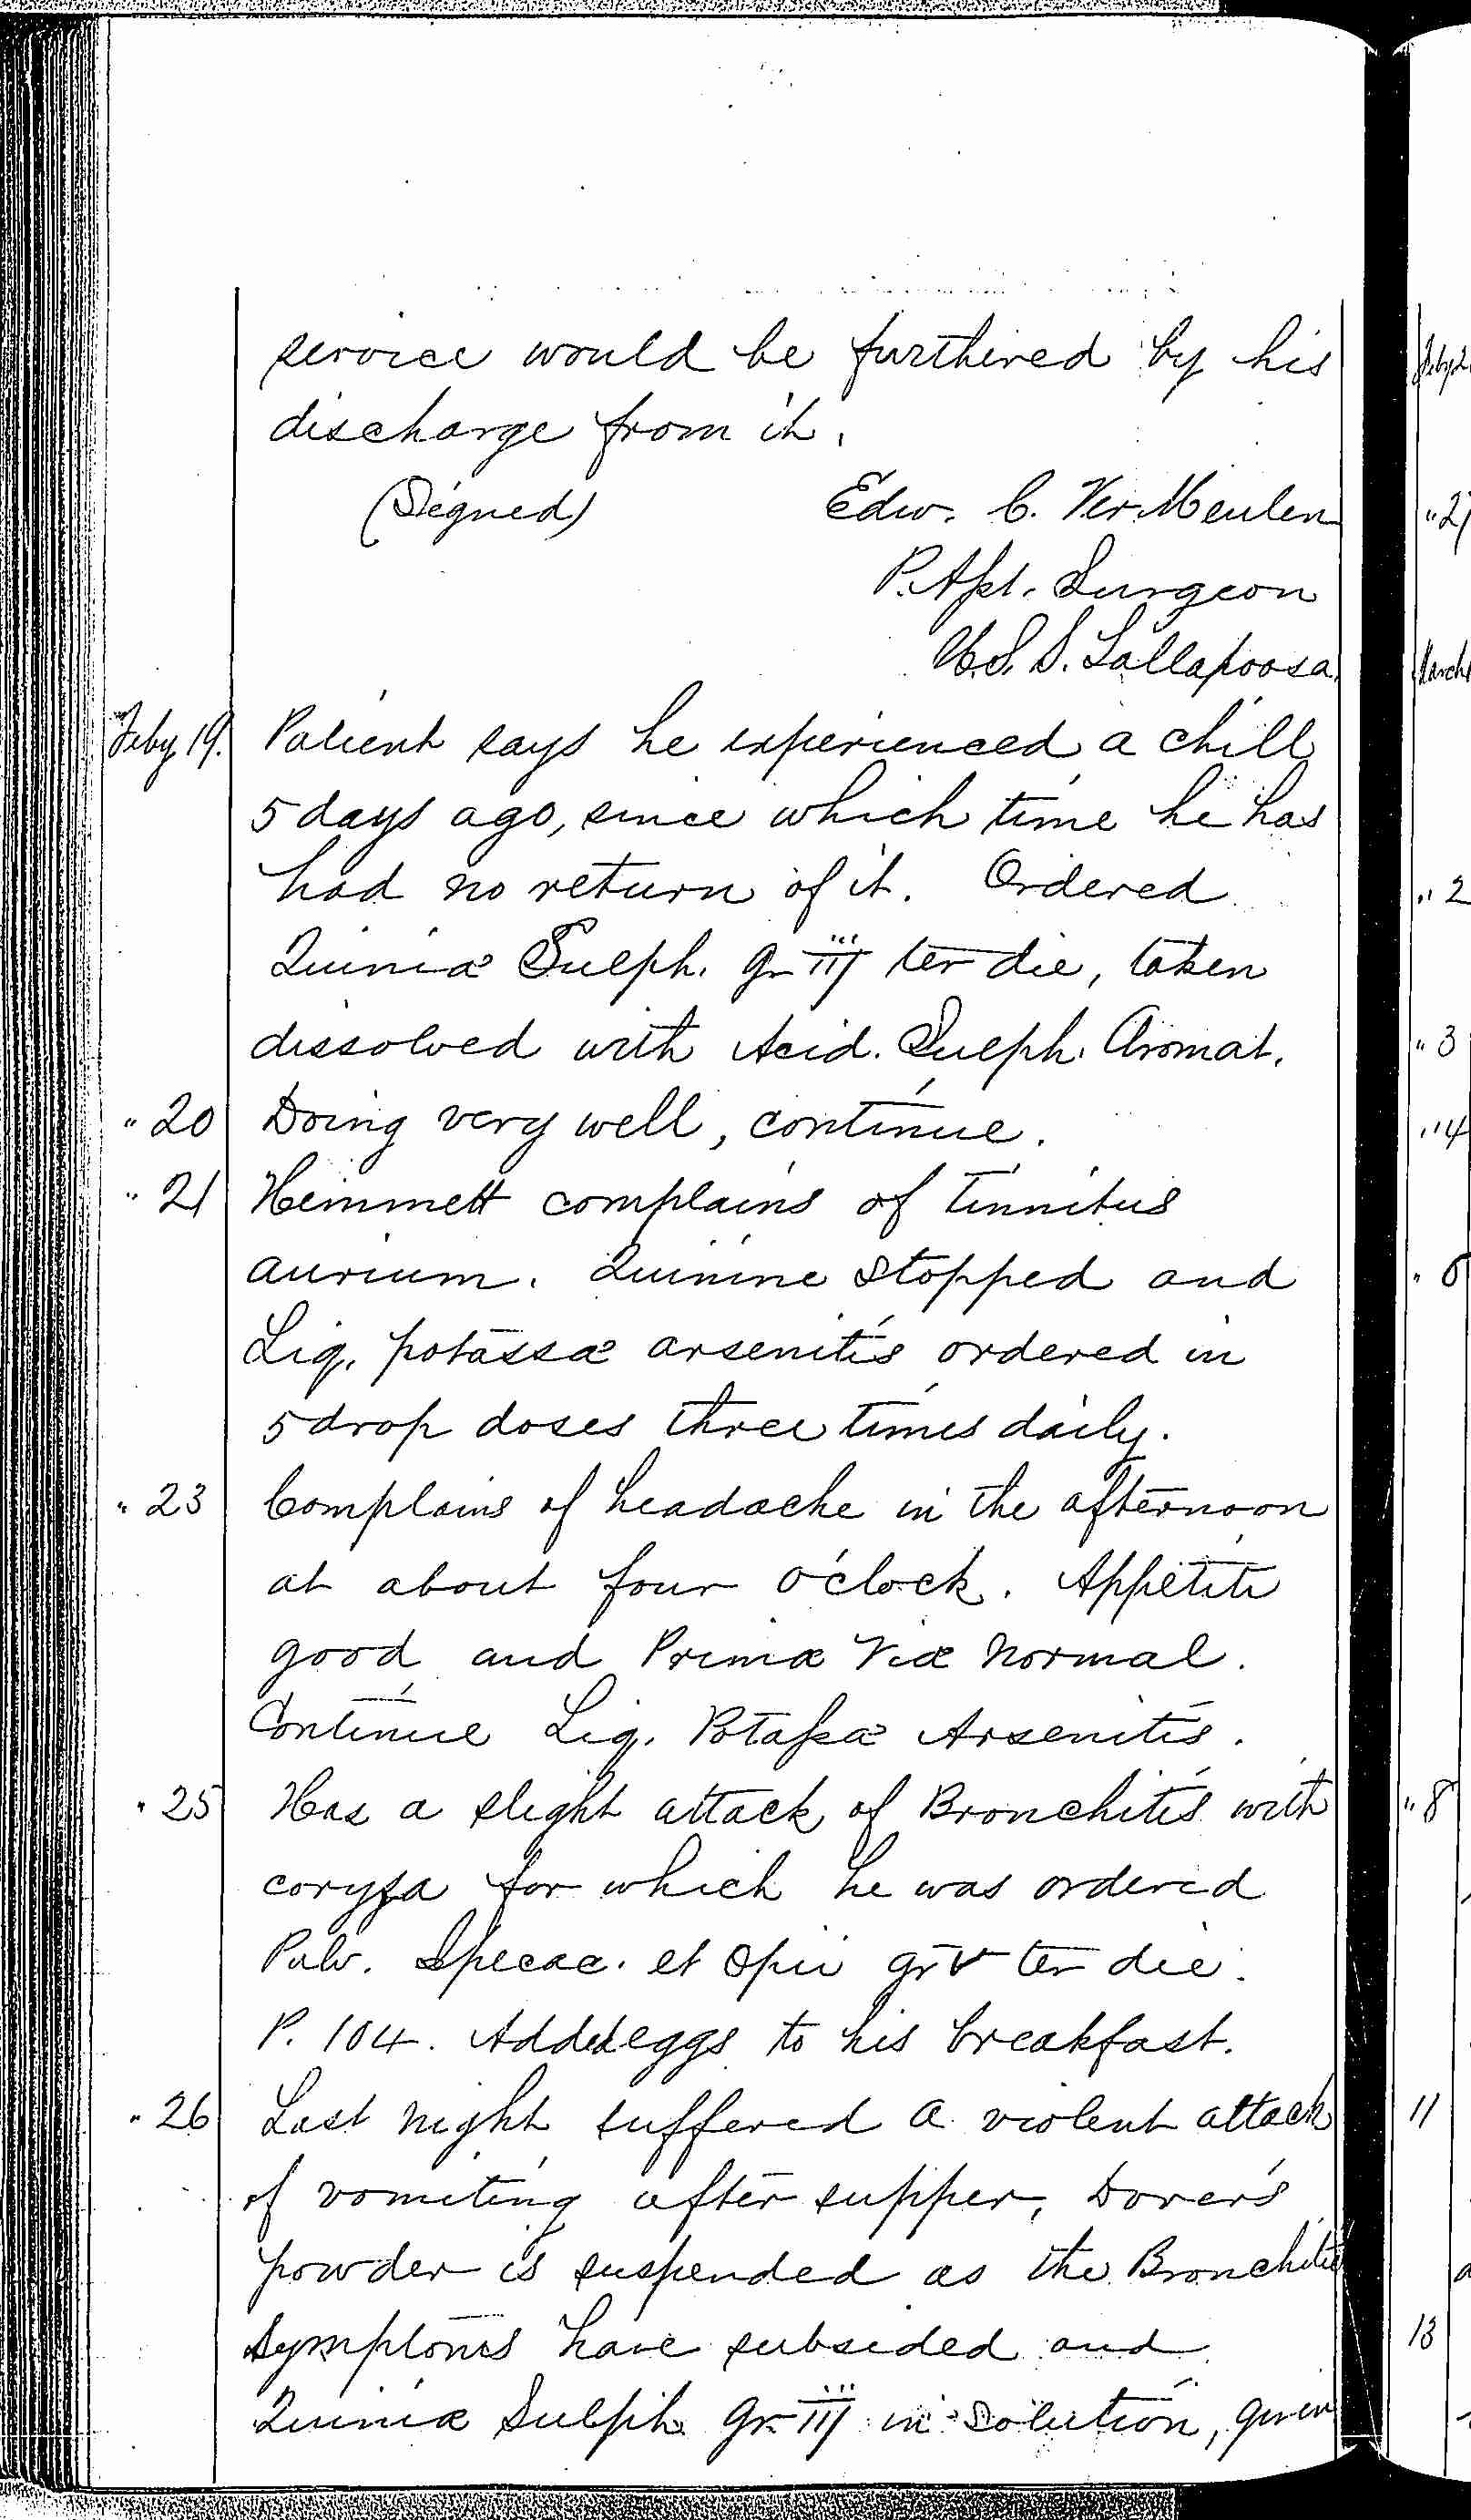 Entry for Frederick Hammett (page 2 of 5) in the log Hospital Tickets and Case Papers - Naval Hospital - Washington, D.C. - 1868-69